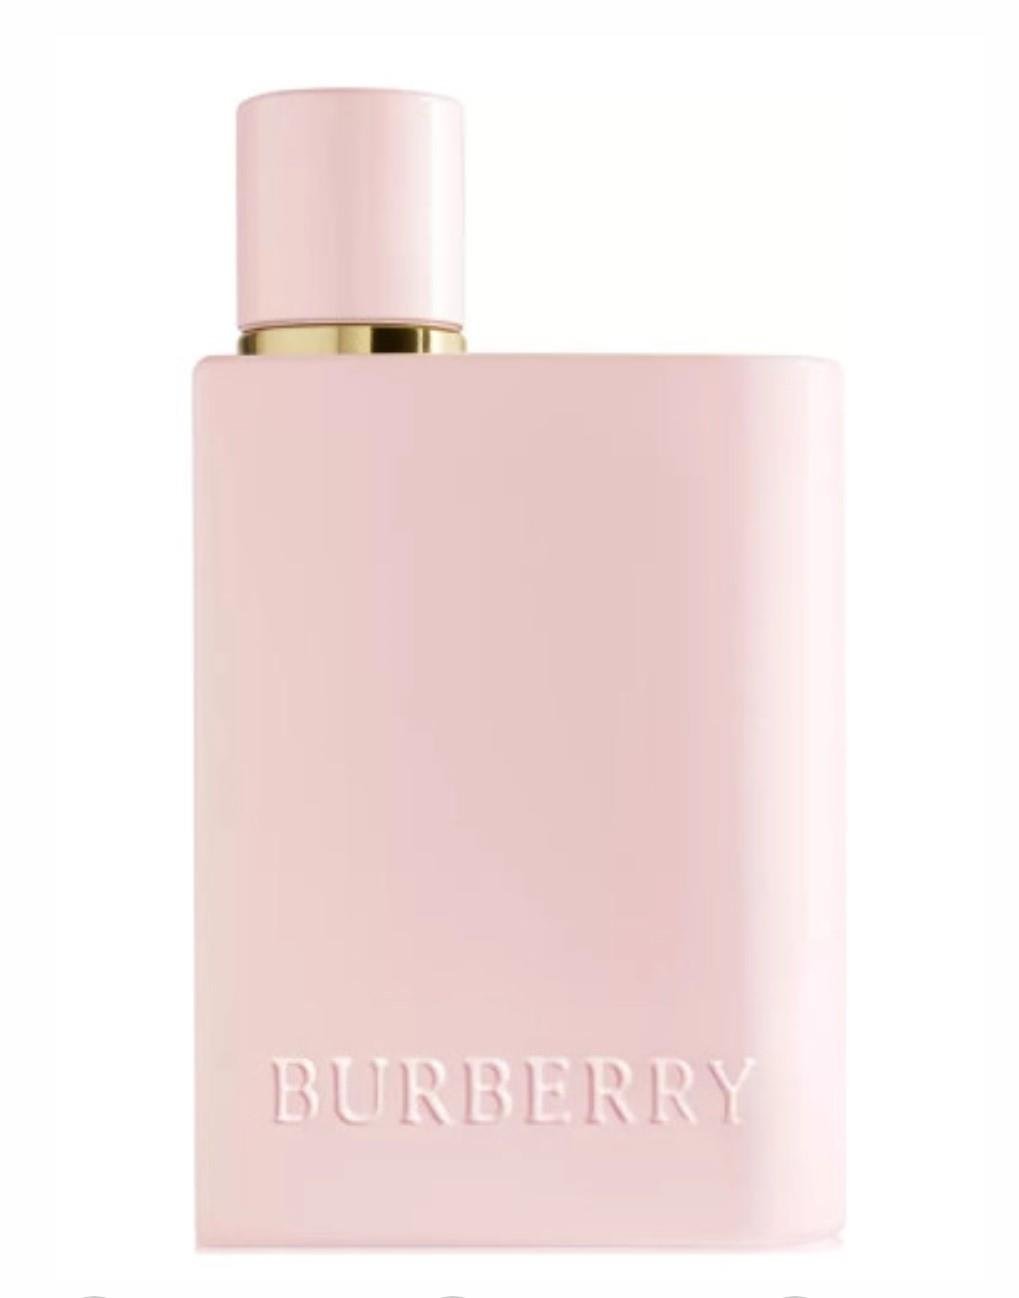 EdP Decanted Her Buy Burberry Elixir - Court Perfume - Samples The Perfumed and Fragrances